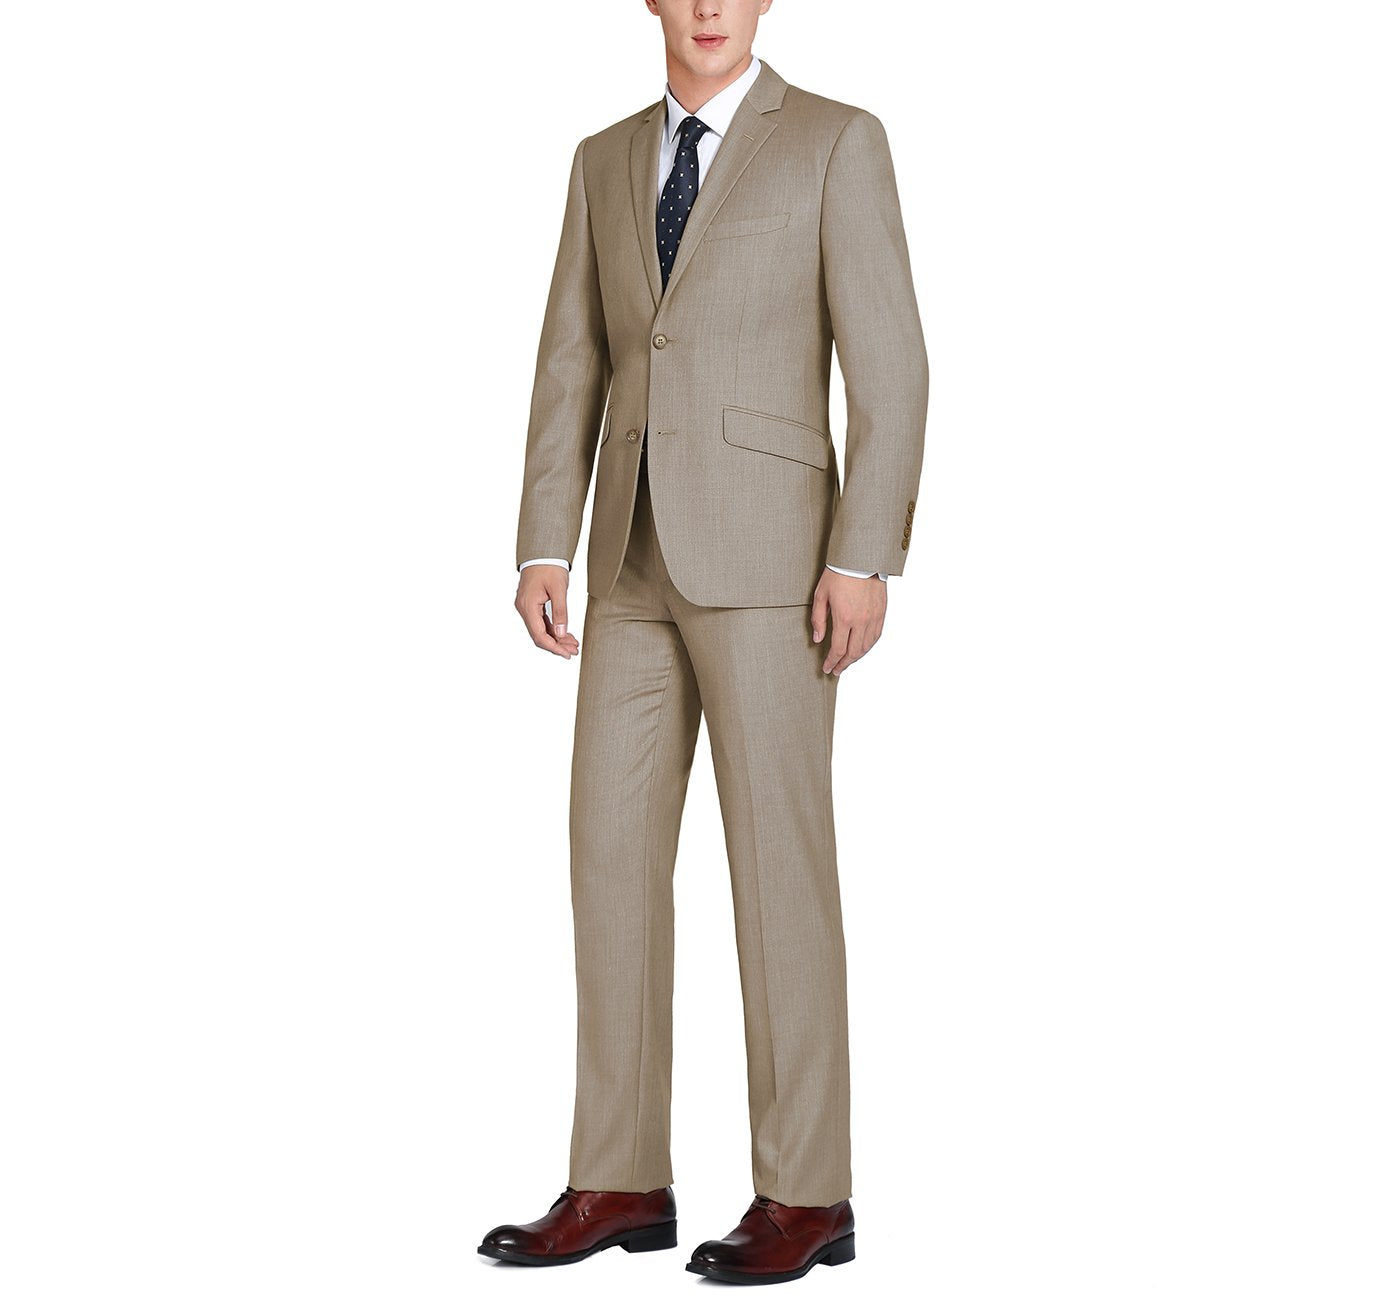 202-3 Men's Light Heathered Brown 2-Piece Single Breasted Notch Lapel Suit